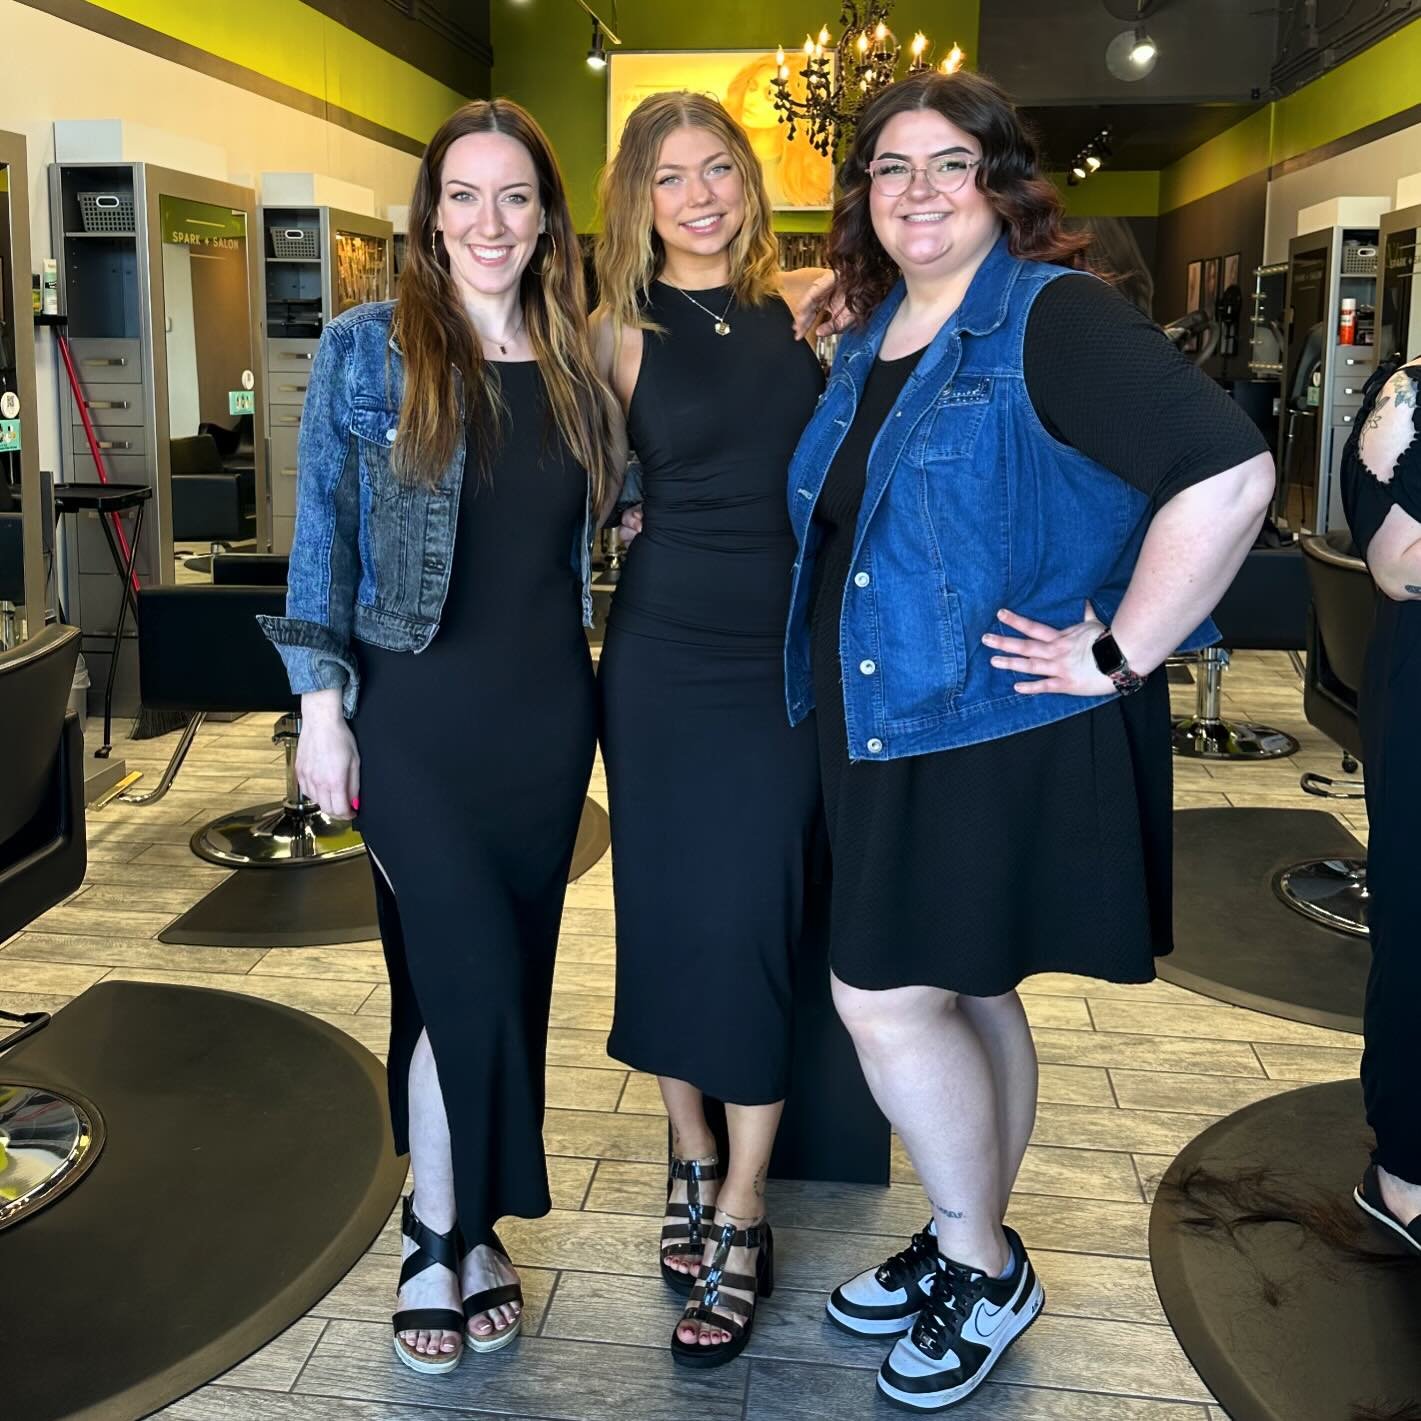 Let&rsquo;s go, girls! @christinek_hairtistry, @siarahs_chair, and @hair_jamz put the YAY in FriYAY 💖

#maplegrove #maplegrovesalon #blondingspecialists #extensions #mnsalon #redken #friyay